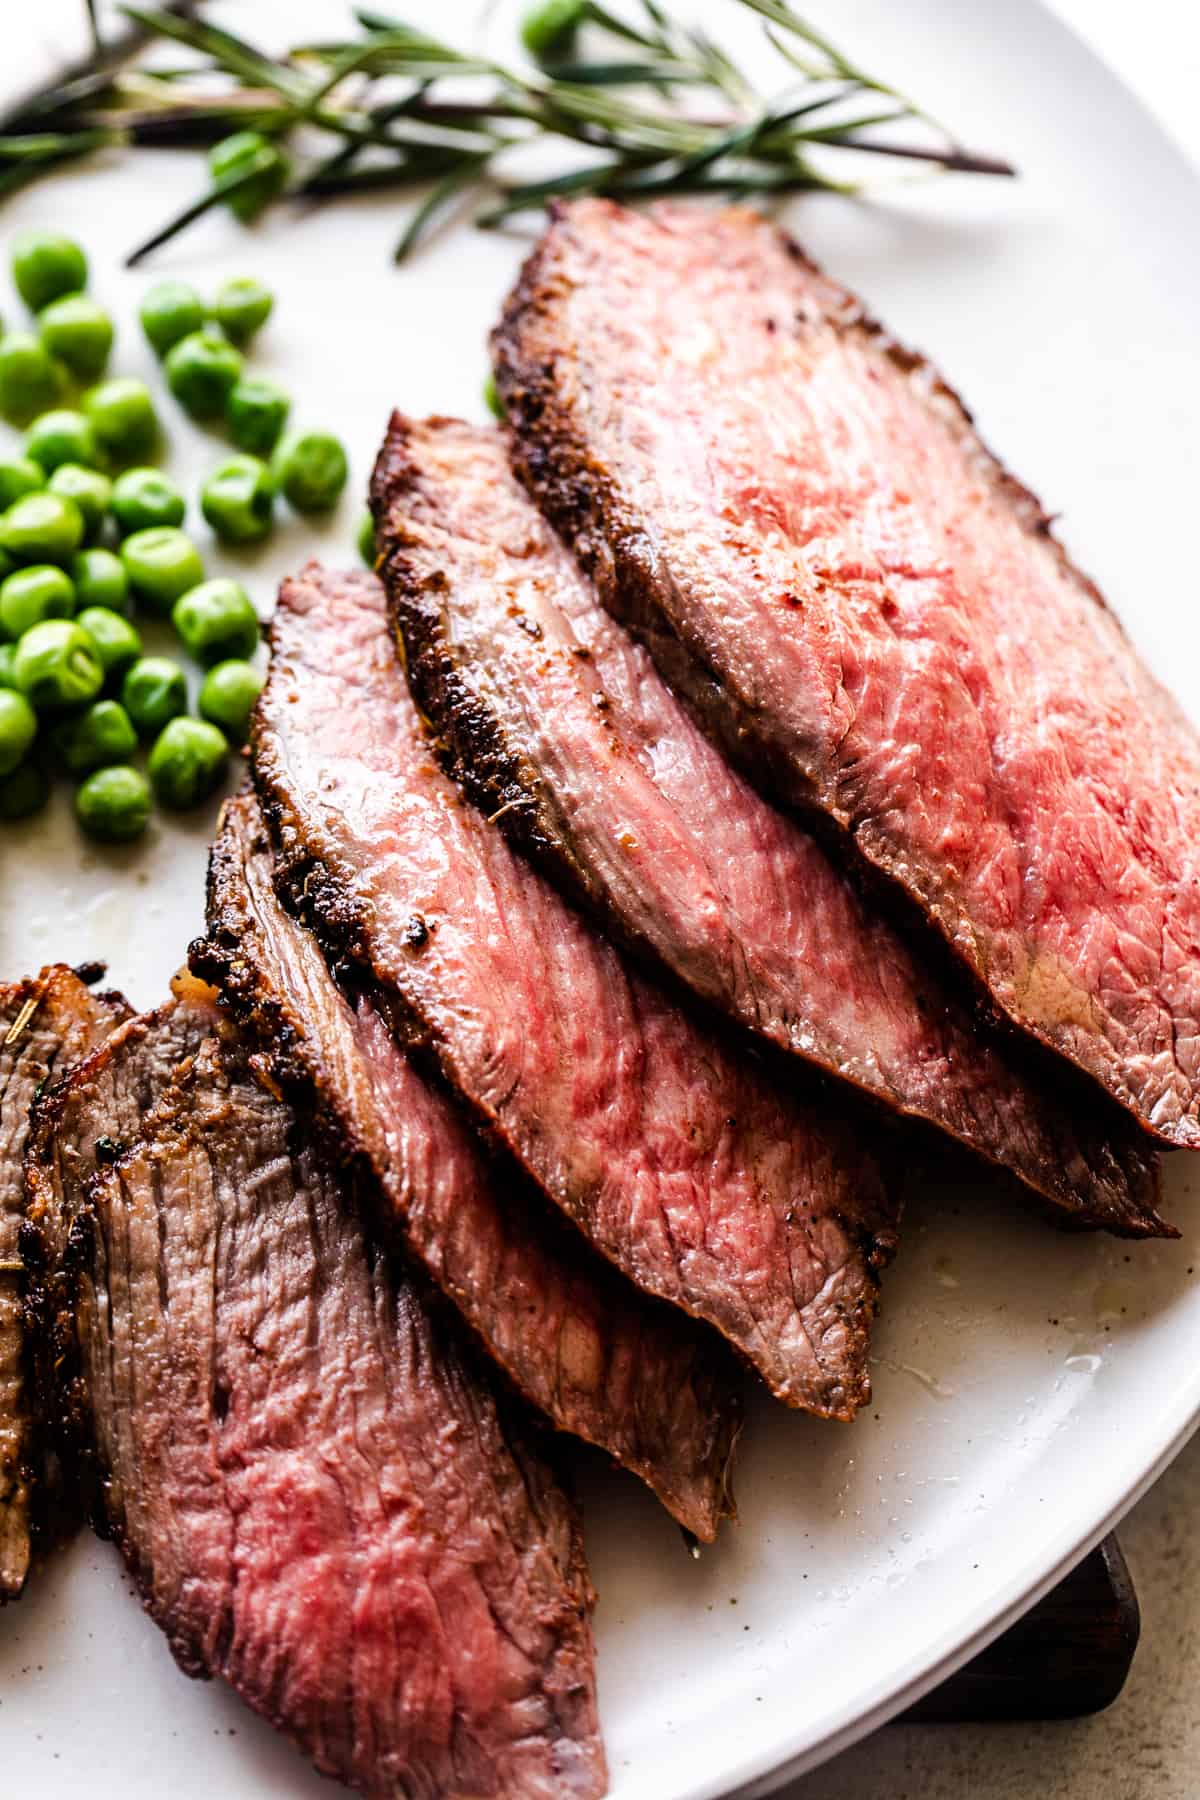 five thinly sliced pieces of tri tip arranged on a white plate with green peas next to it and a branch of rosemary.